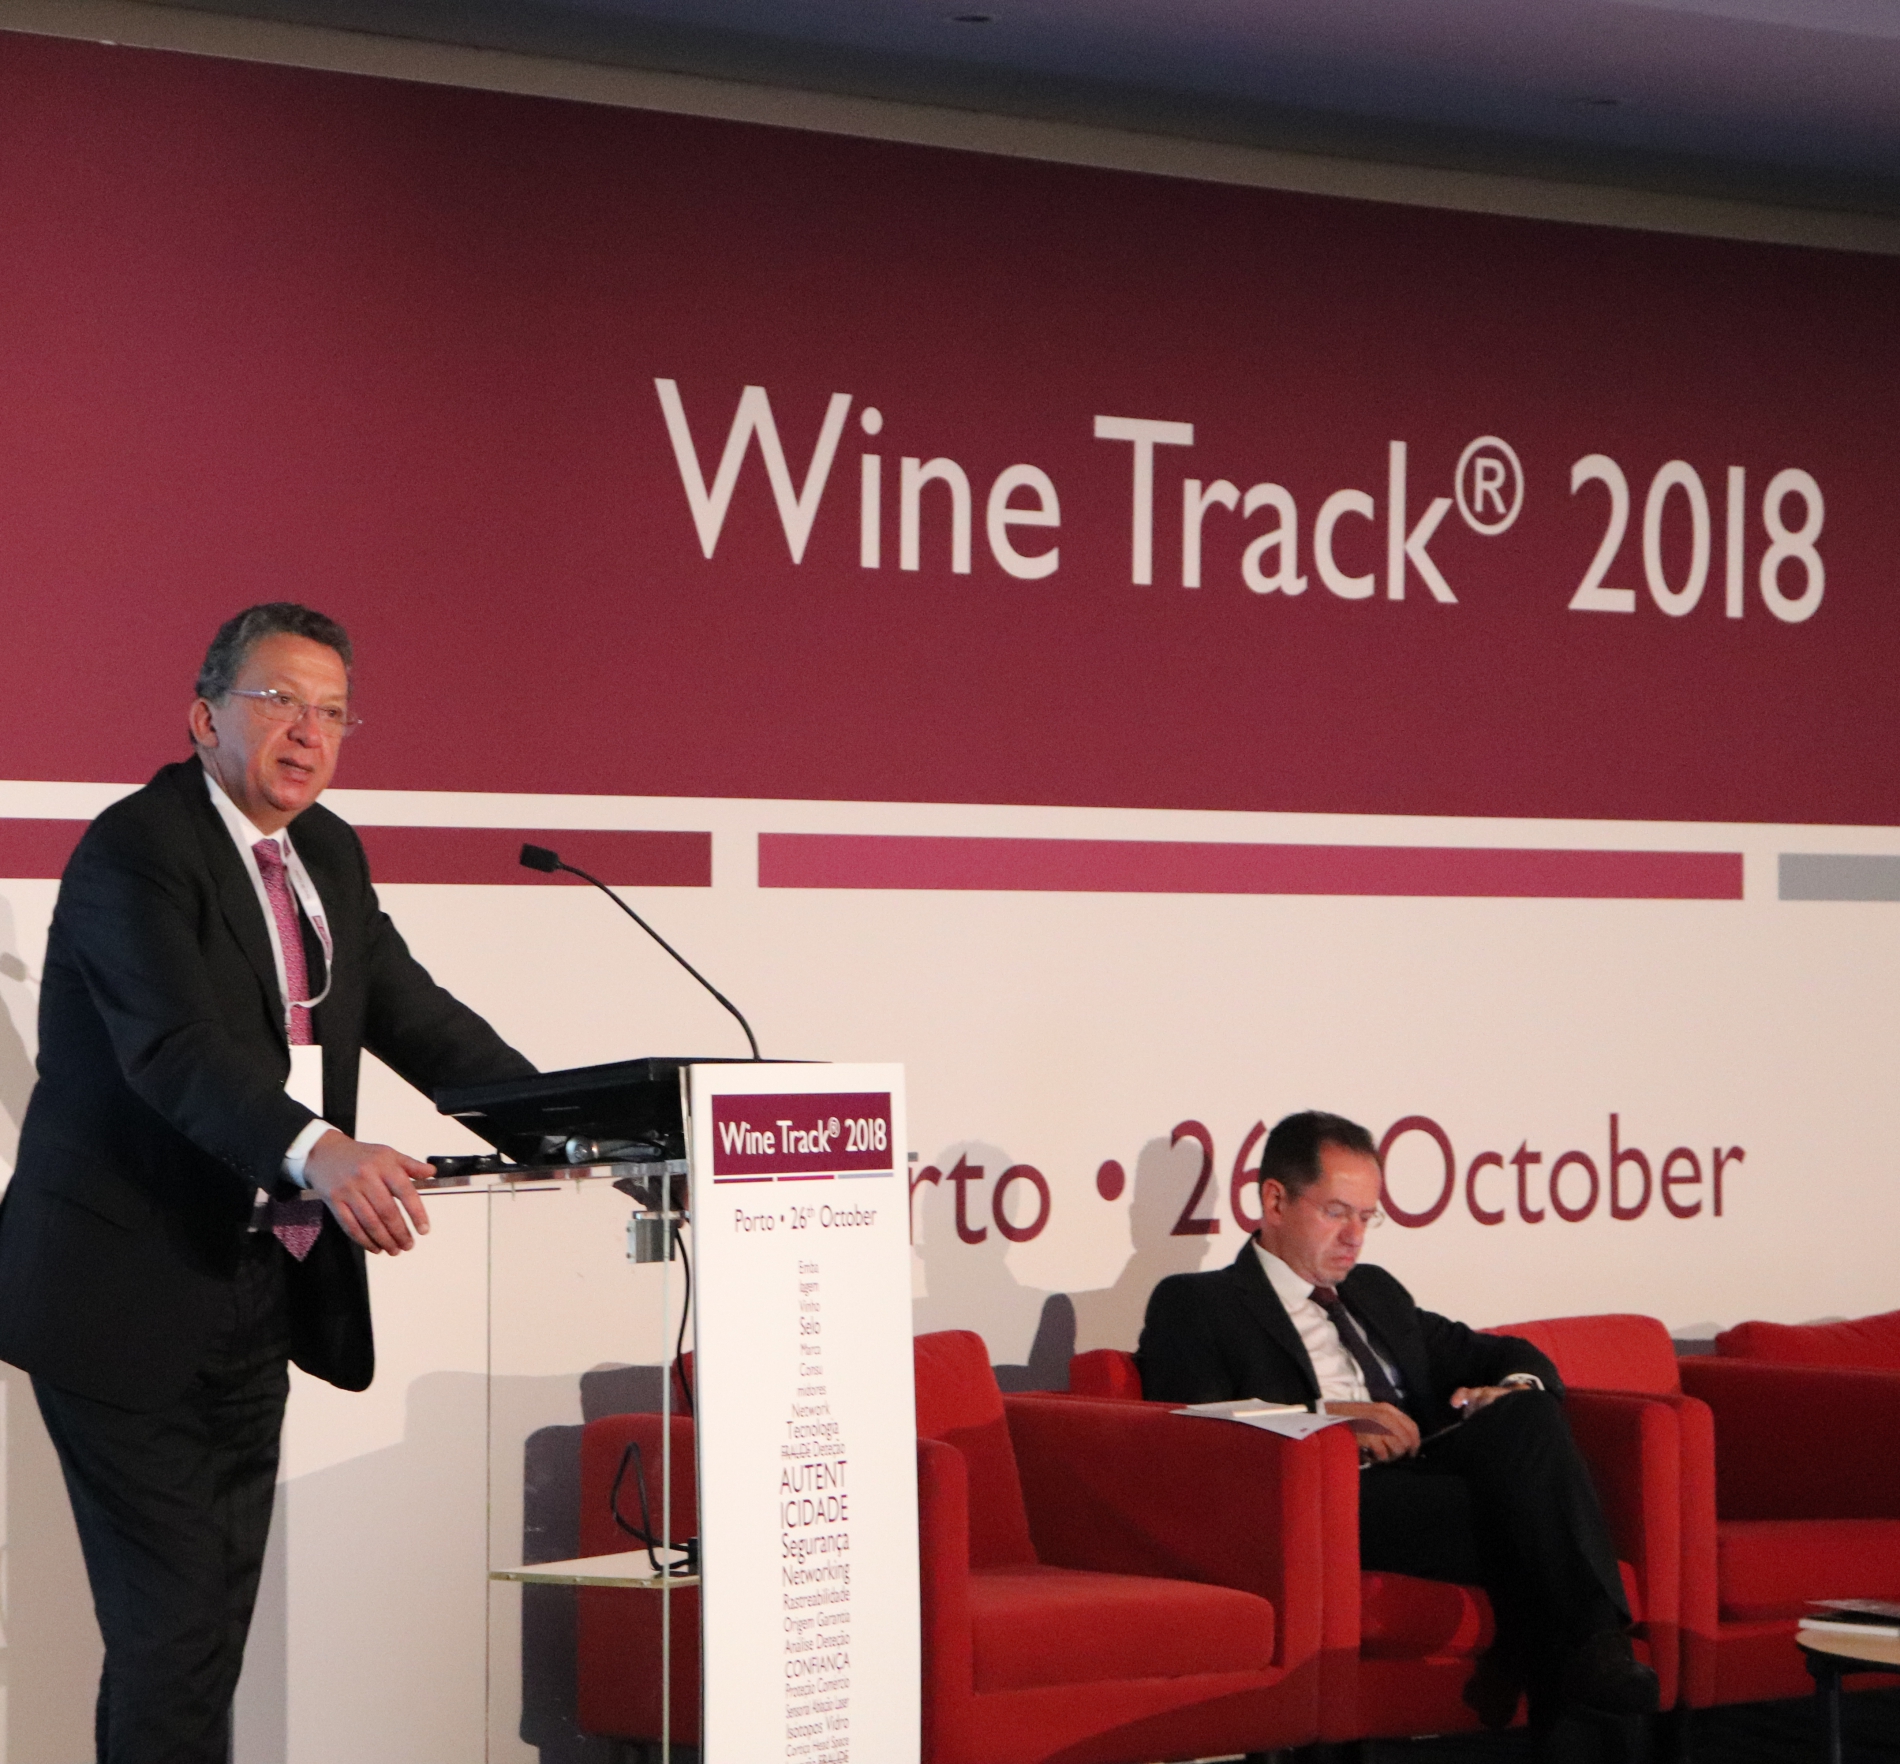 The city of Porto hosted Wine Track® 2018